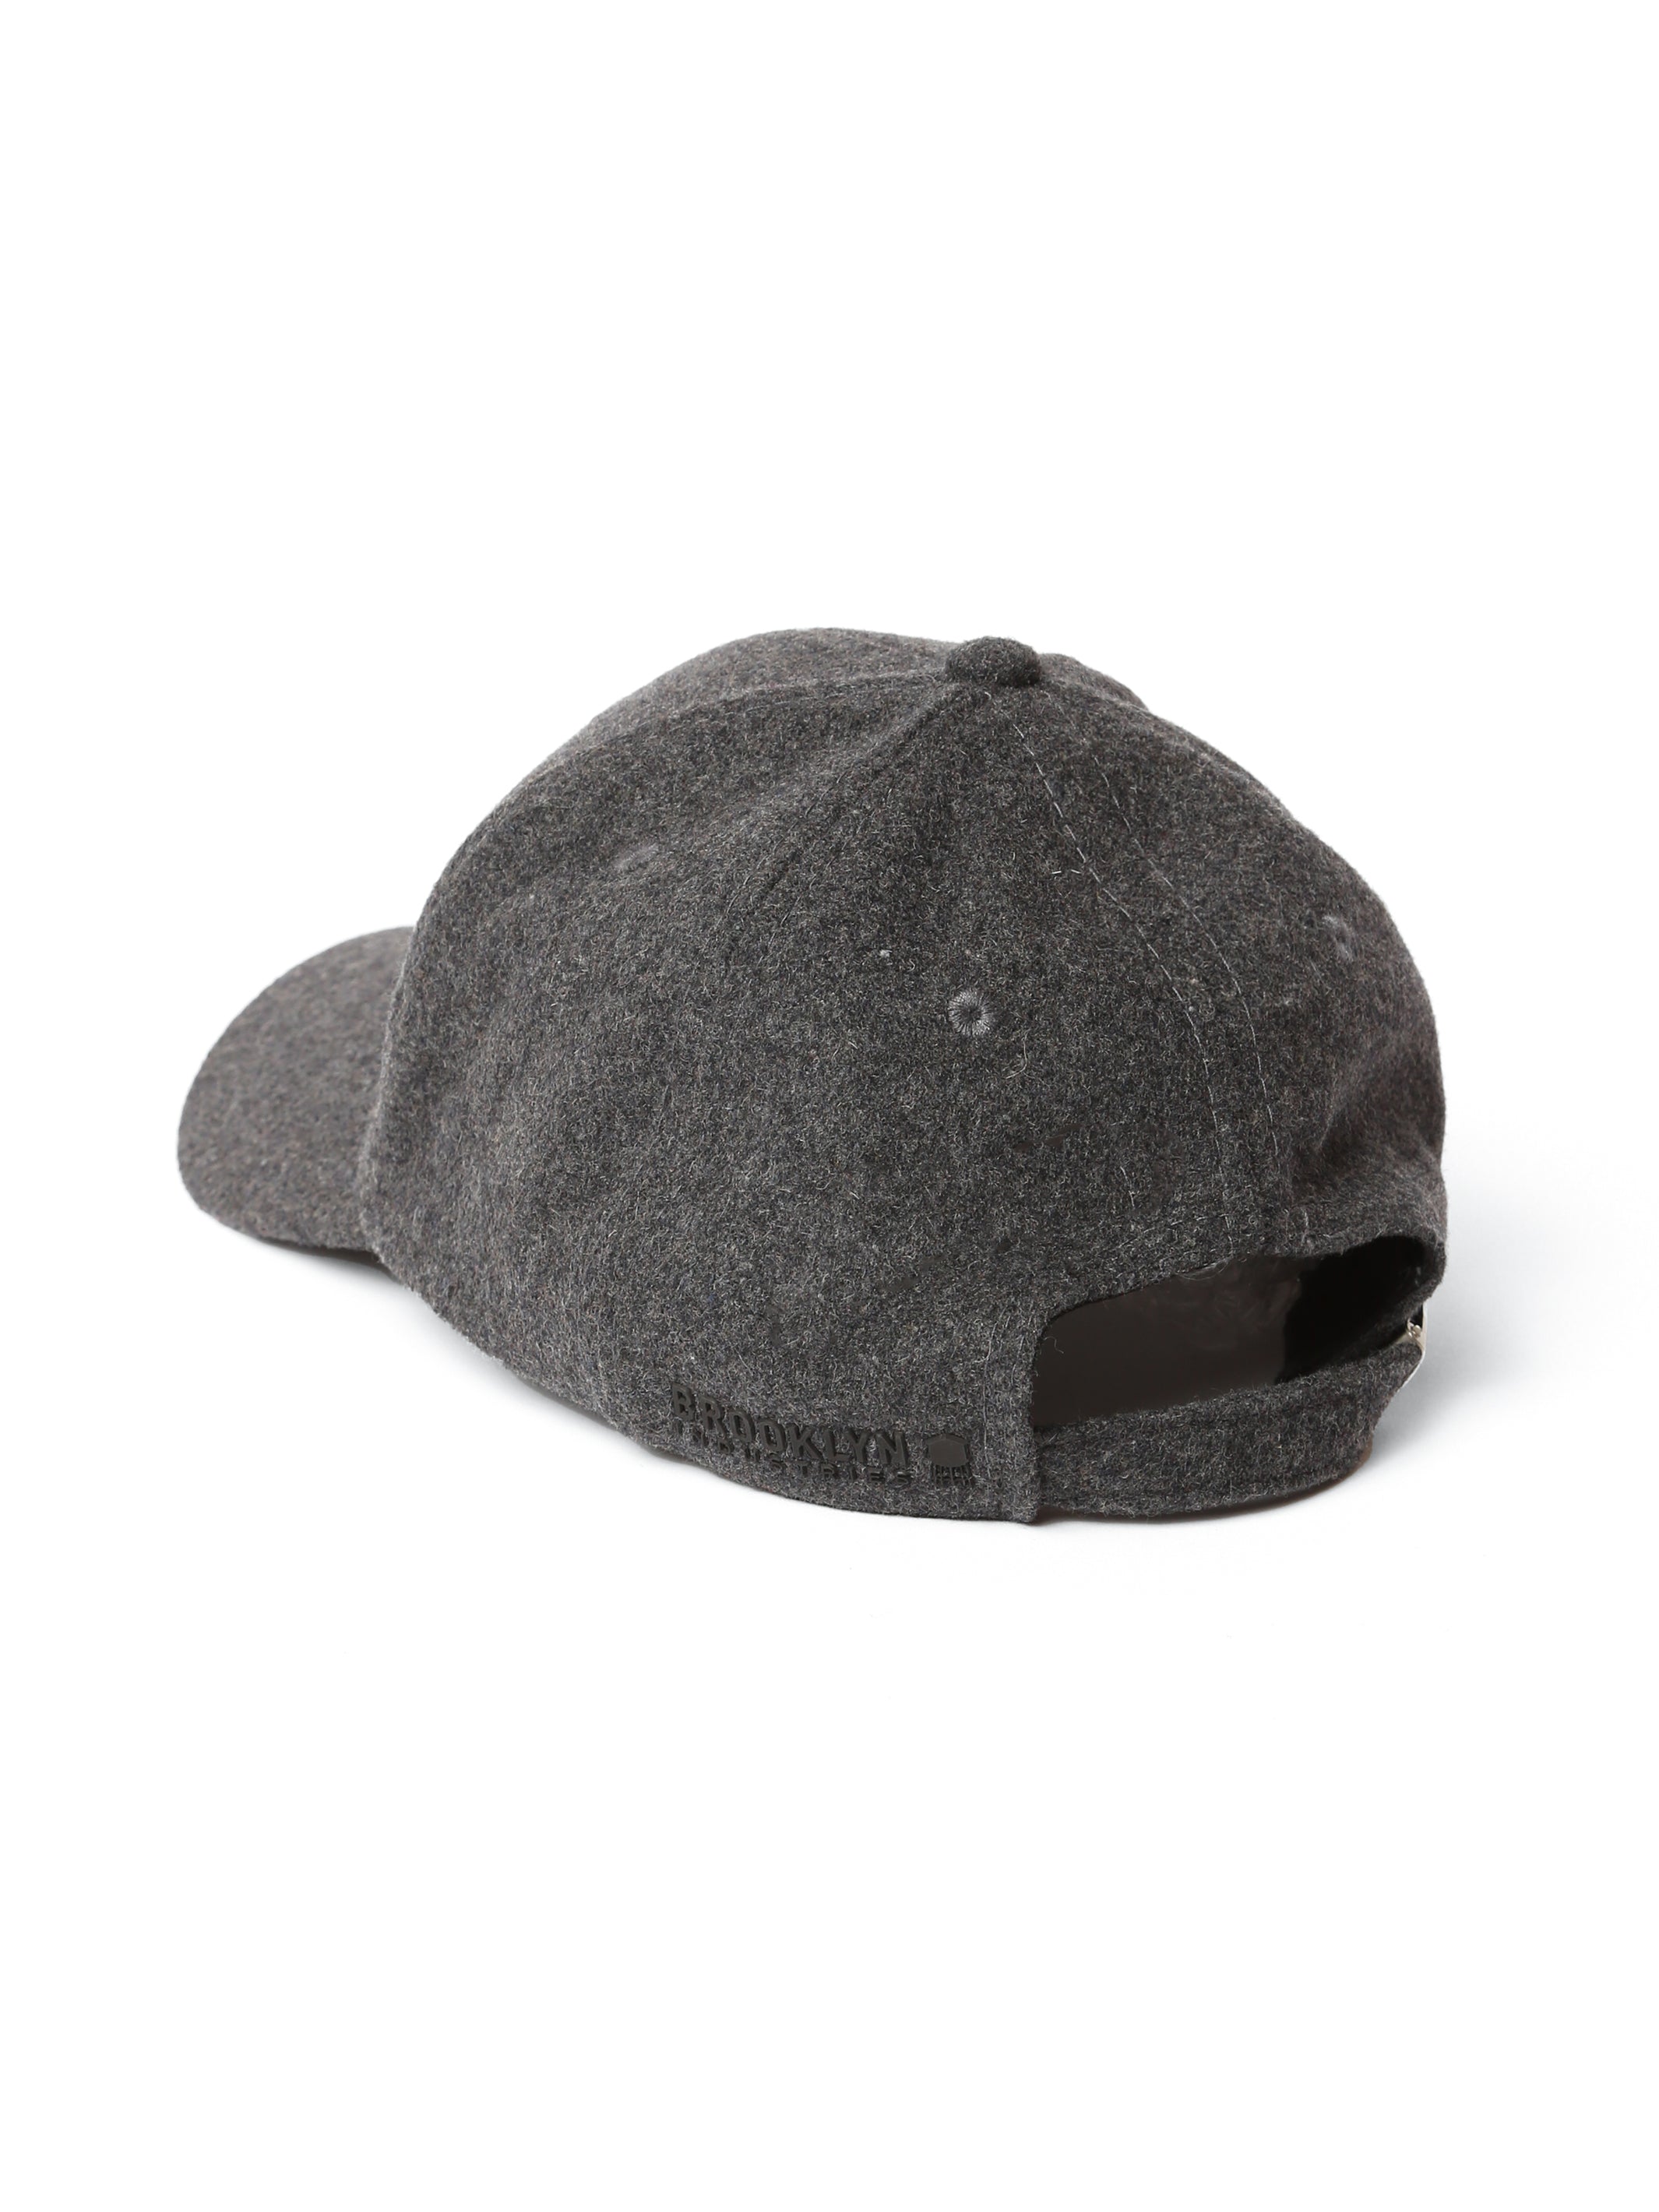 Textured Cap in Anthracite - BROOKLYN INDUSTRIES